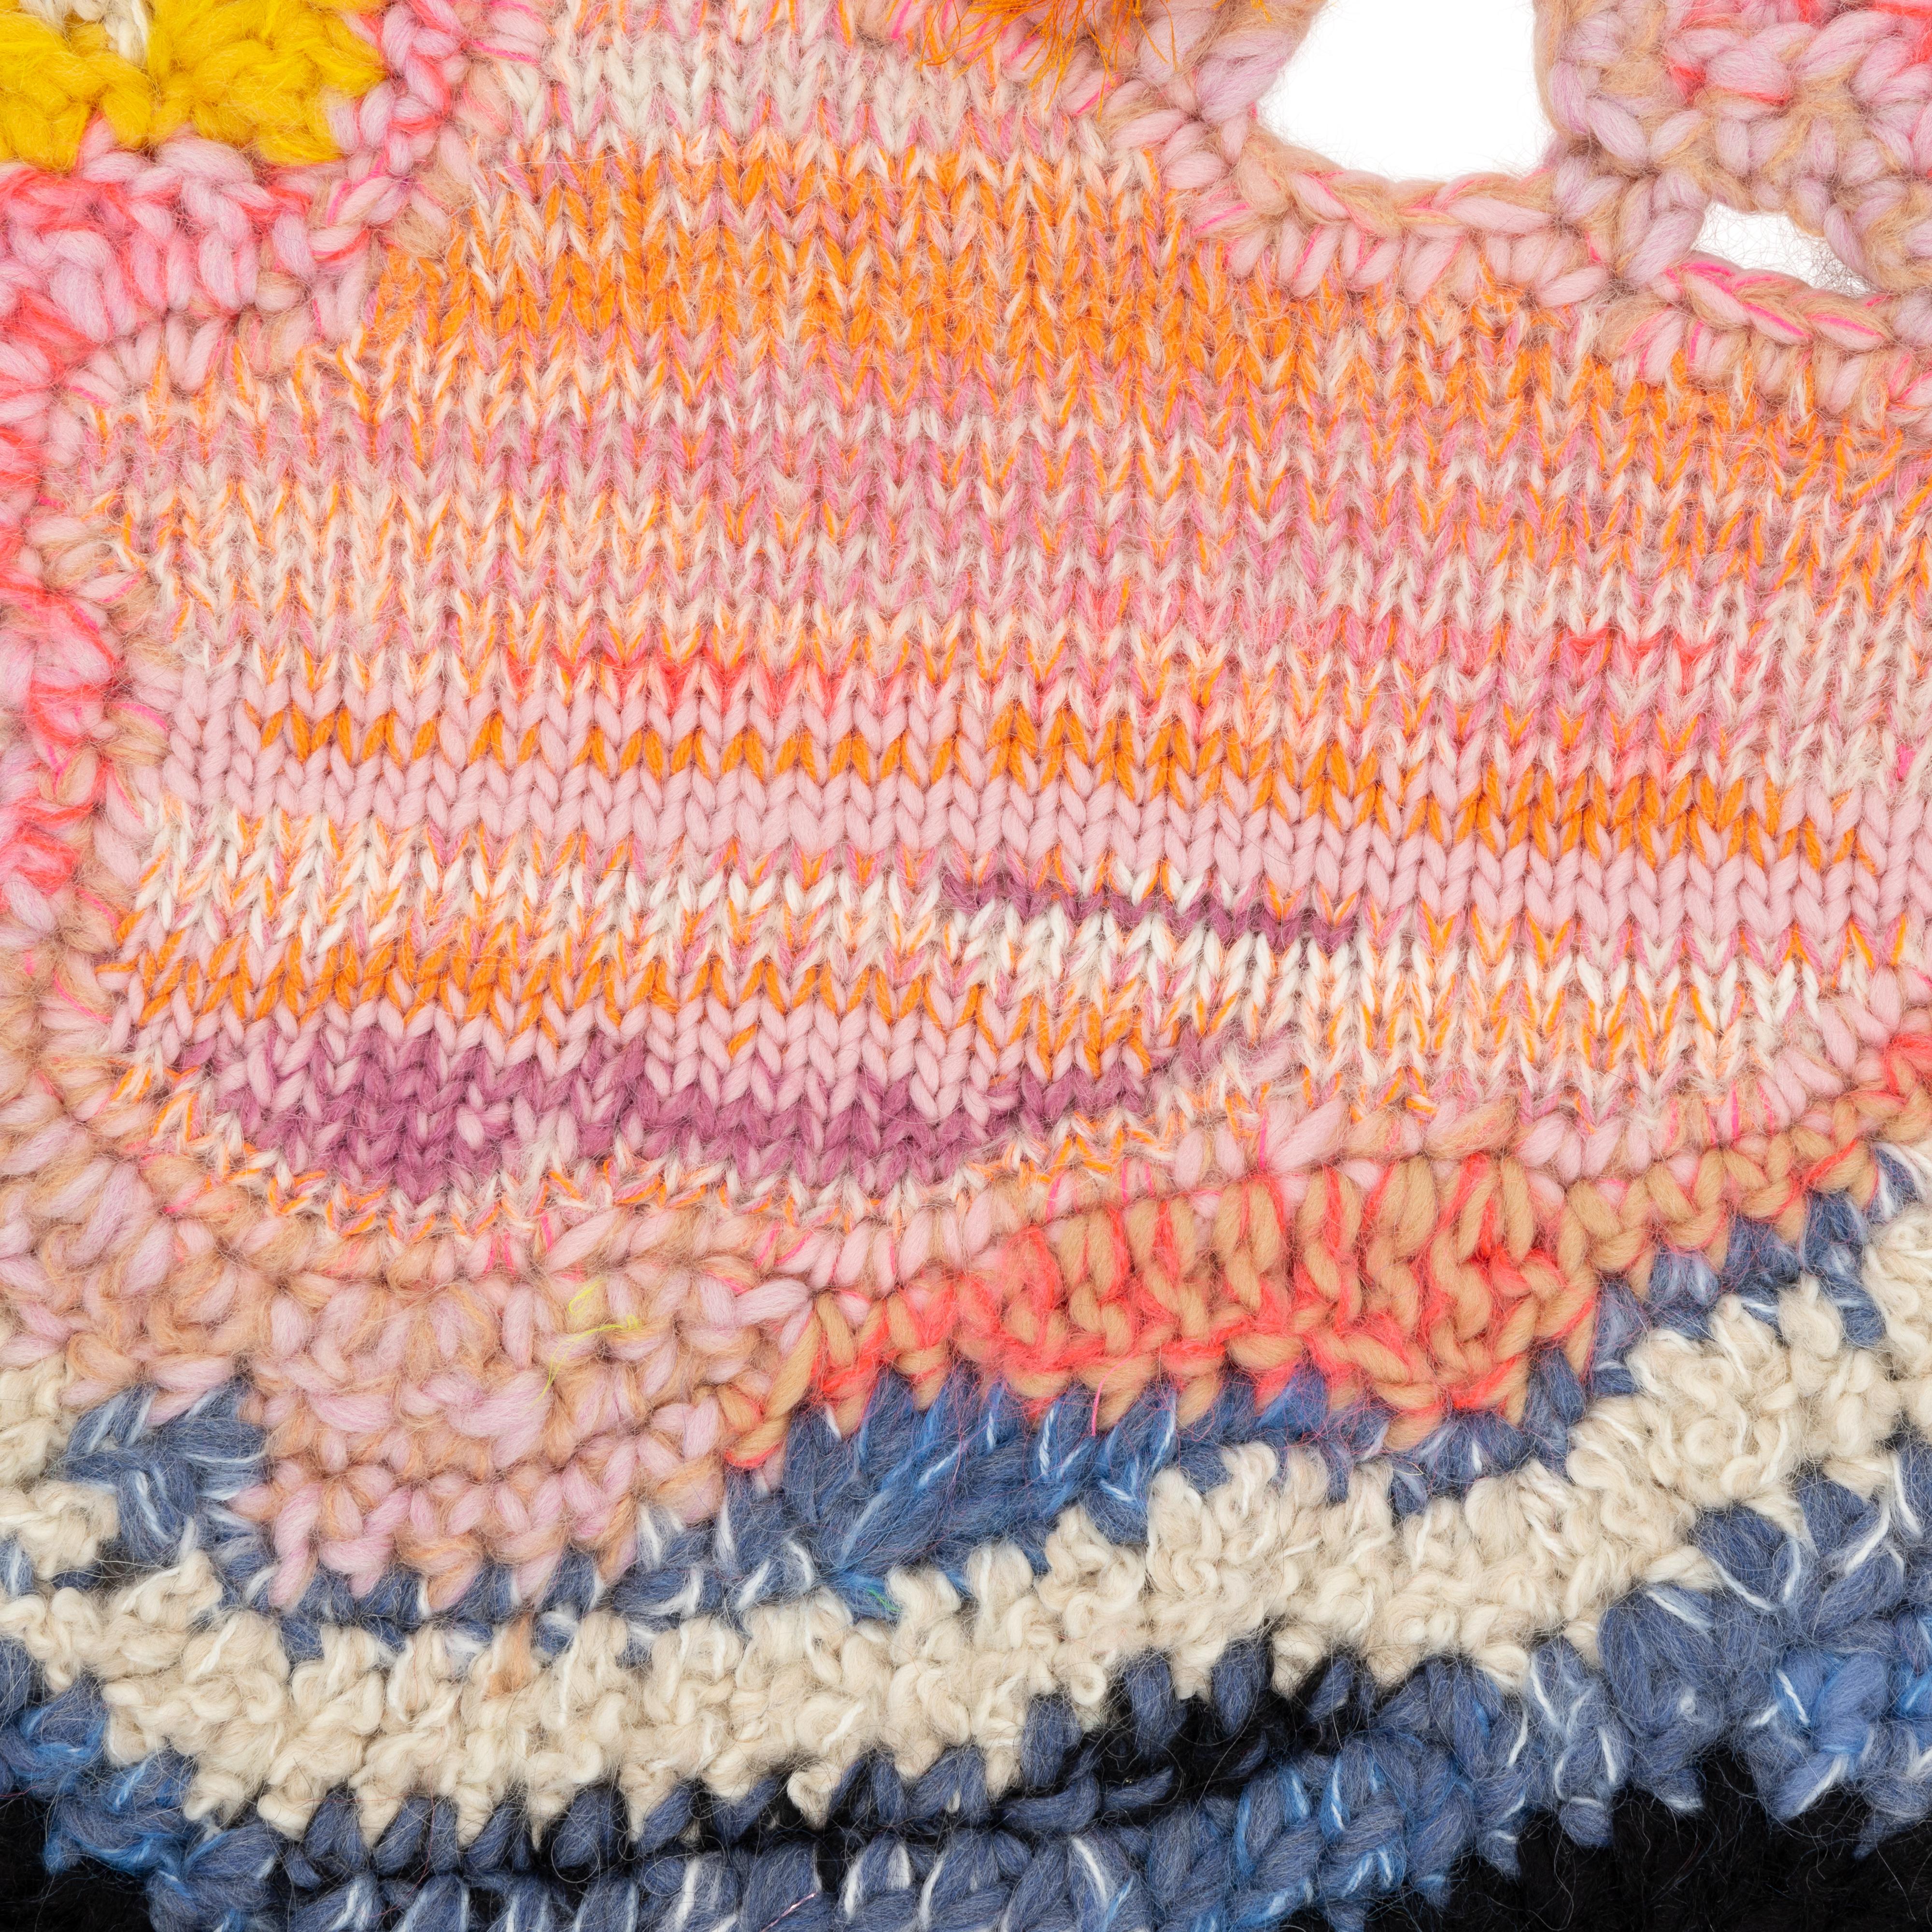 Textile Art, Hand-crafted, Knit and Crochet Art Blanket, Knitted Tapestry, Wall hanging, Affordable Art.
 Small Billow of clouds inspired by the weather in pastel psychedelic colours. Knitted and crocheted pieces are individually created and